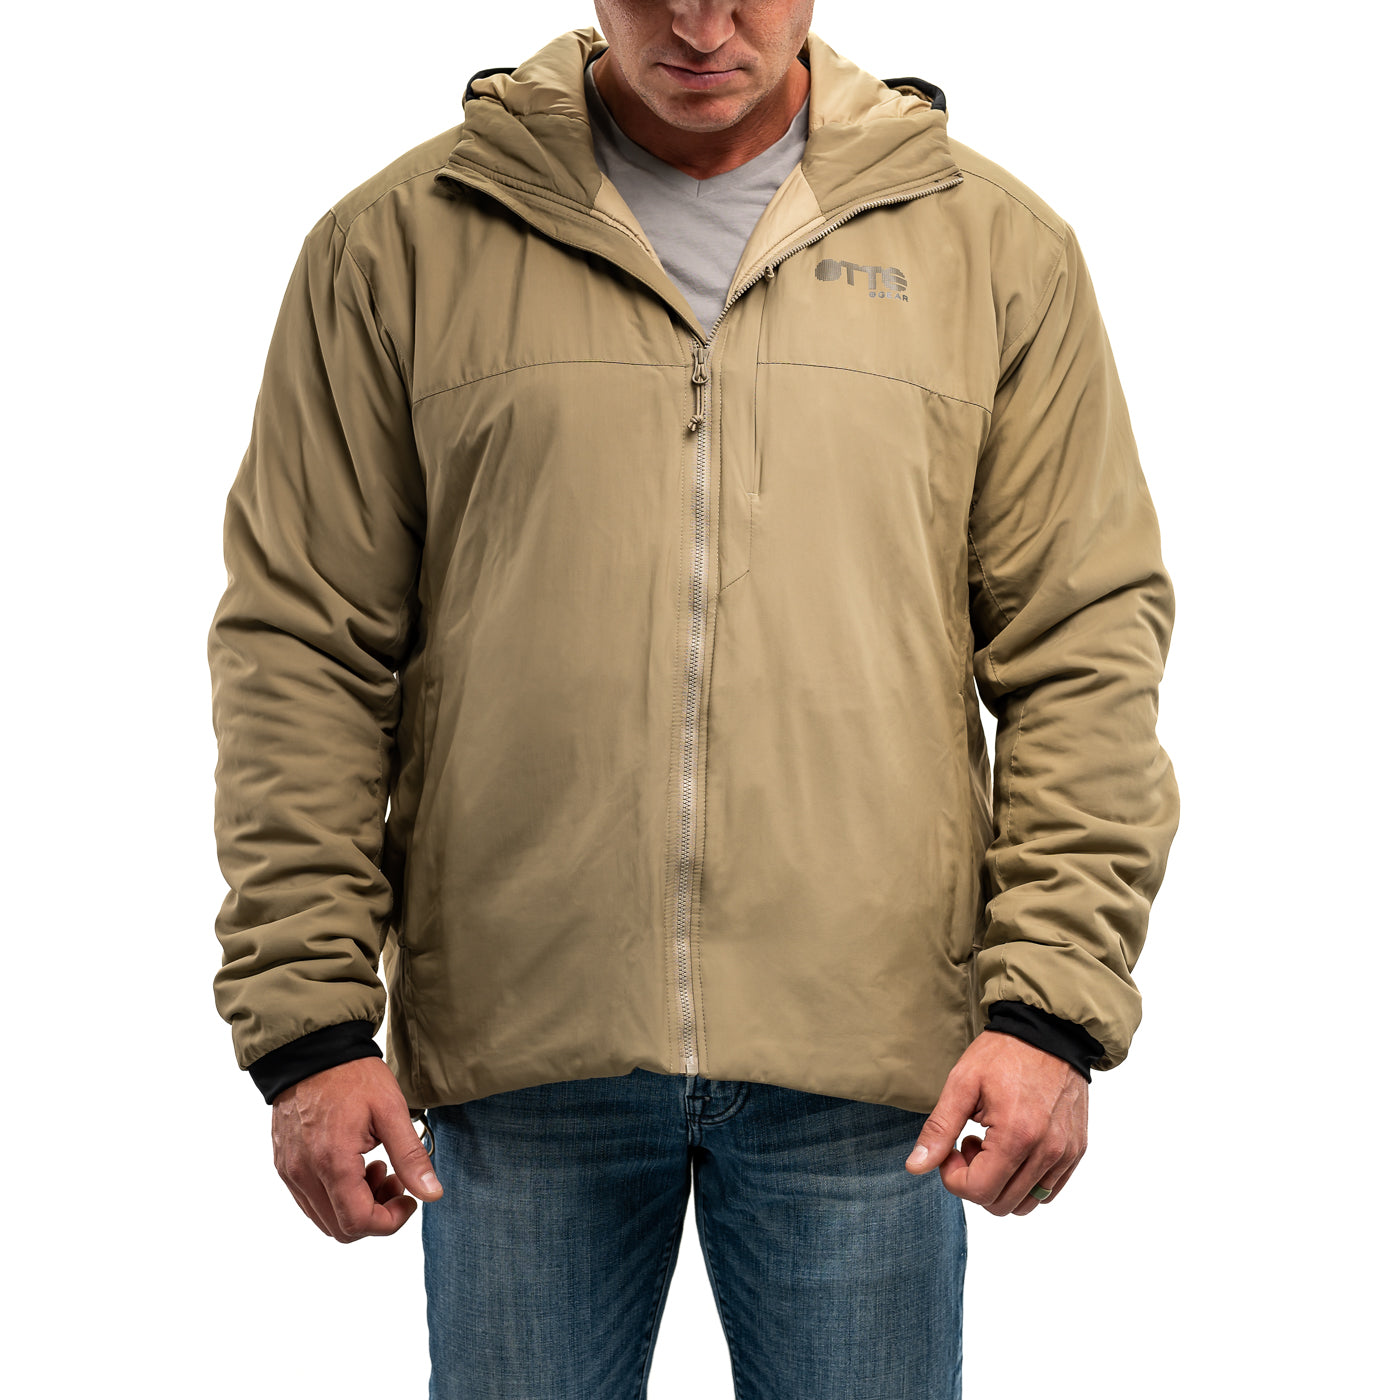 Otte Gear LV Insulated Hoody Jacket - Limited Edition